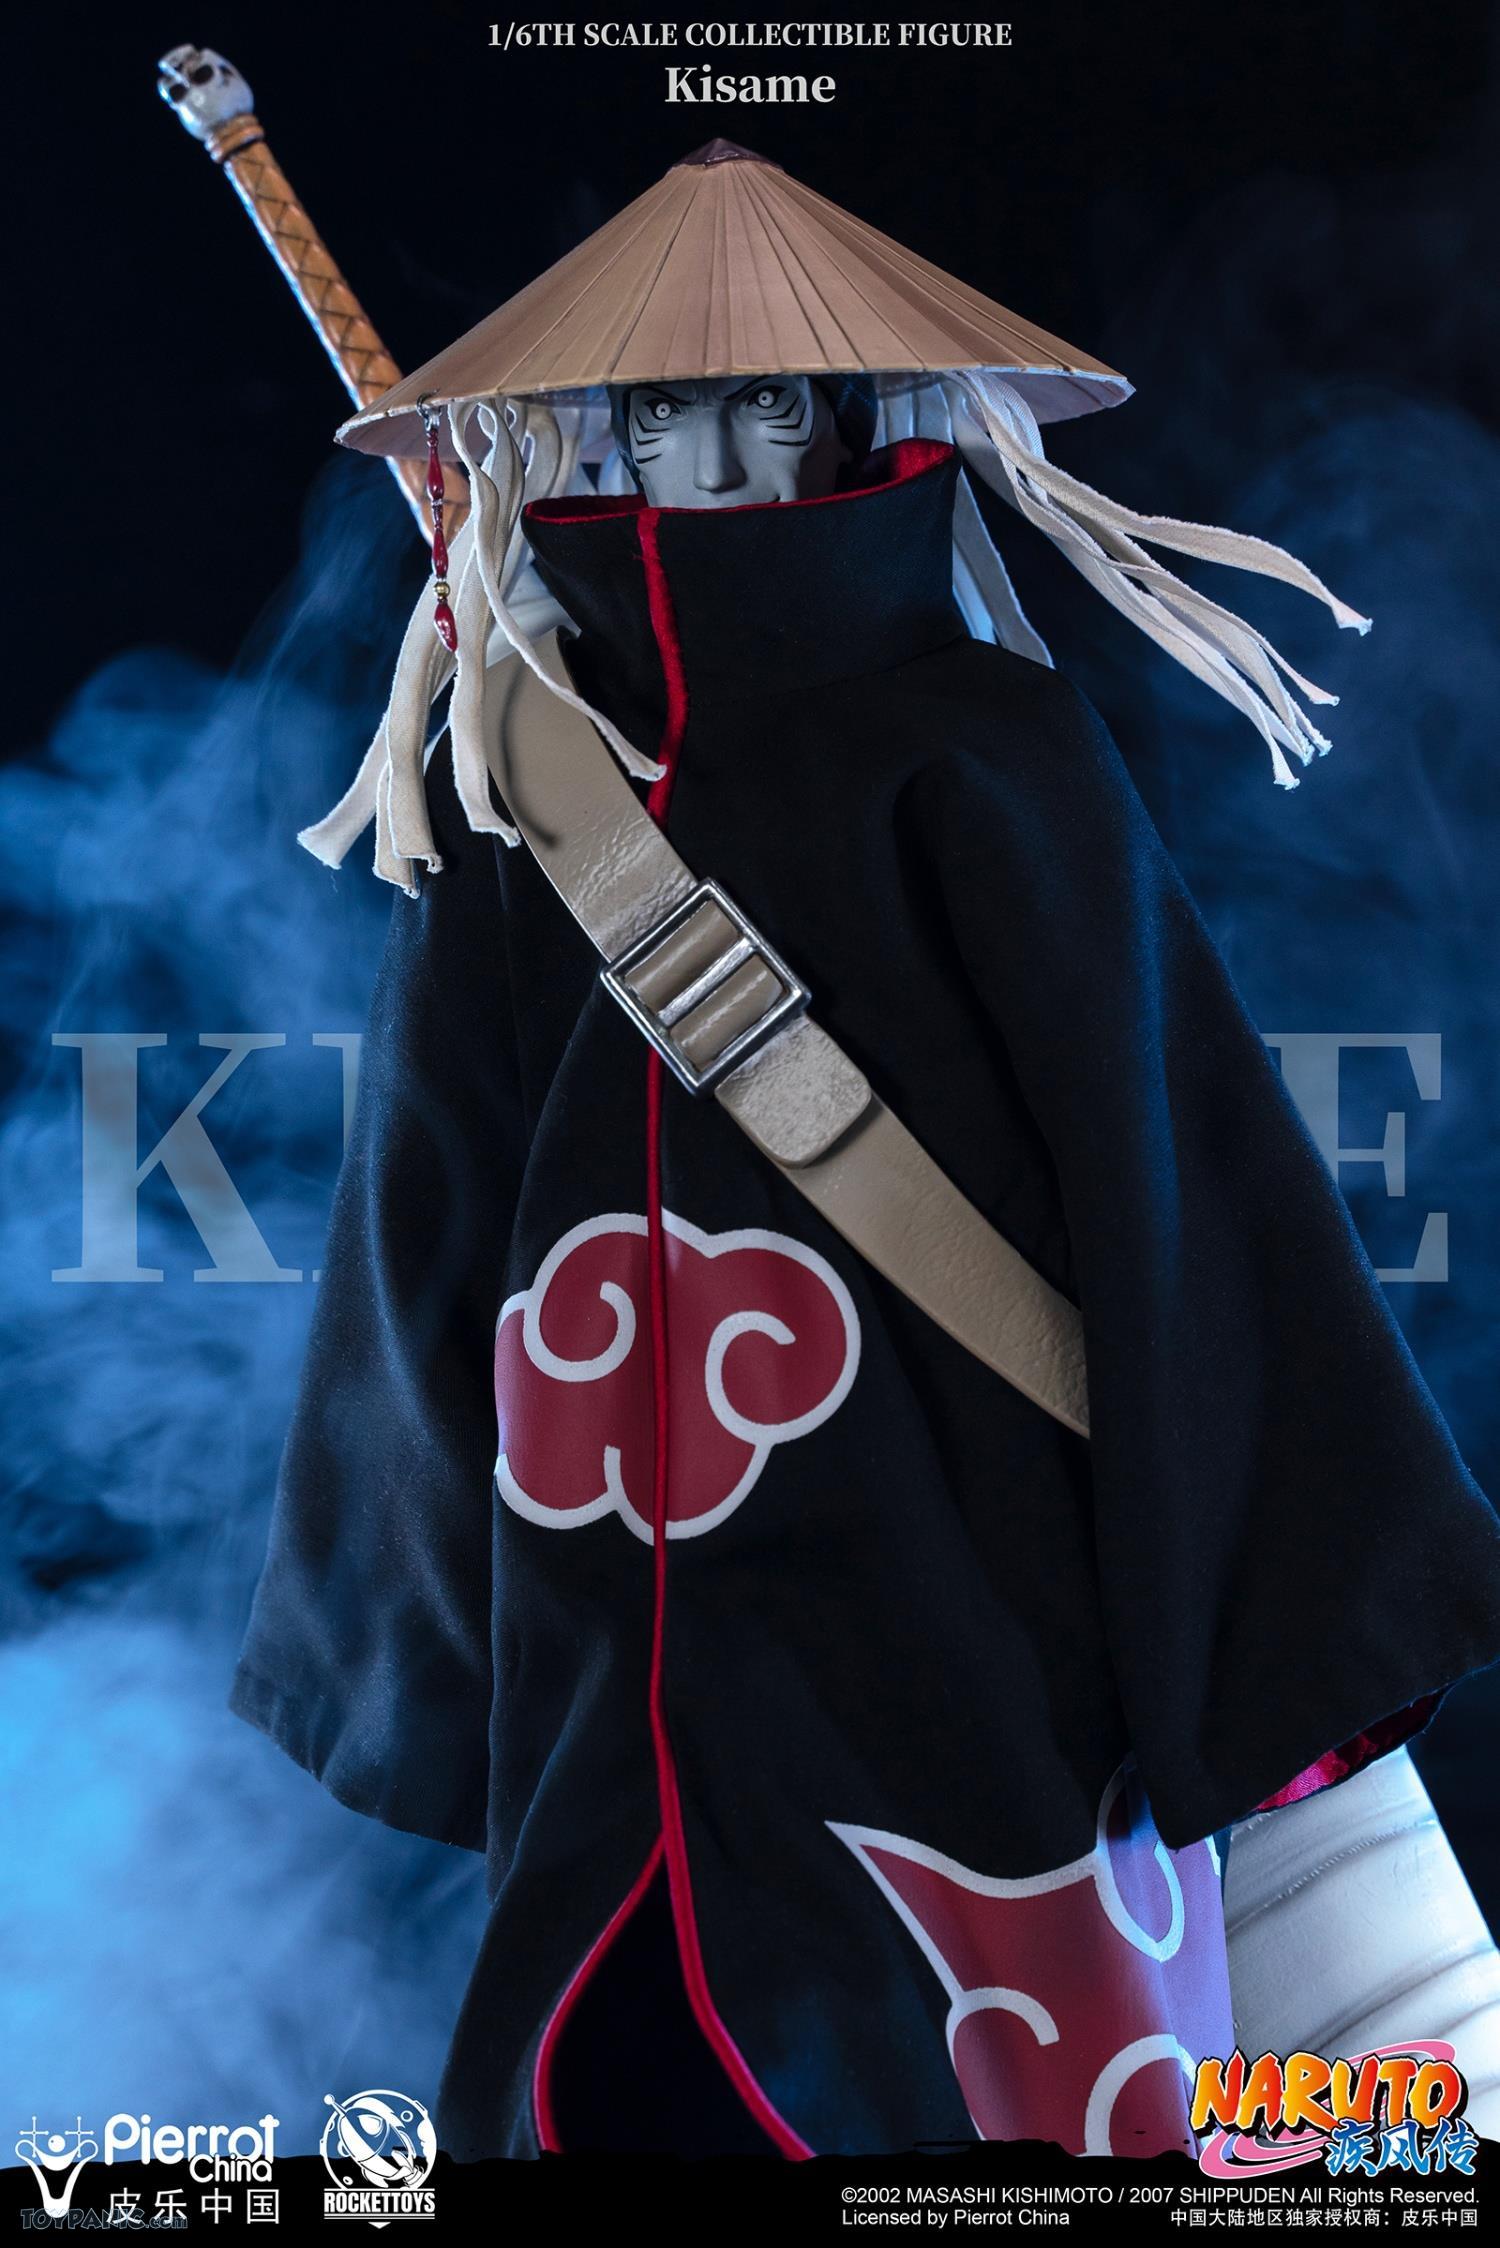 RocketToys - NEW PRODUCT: Rocket Toys ROC-007 1/6 Scale Kisame 221202460439PM_517257